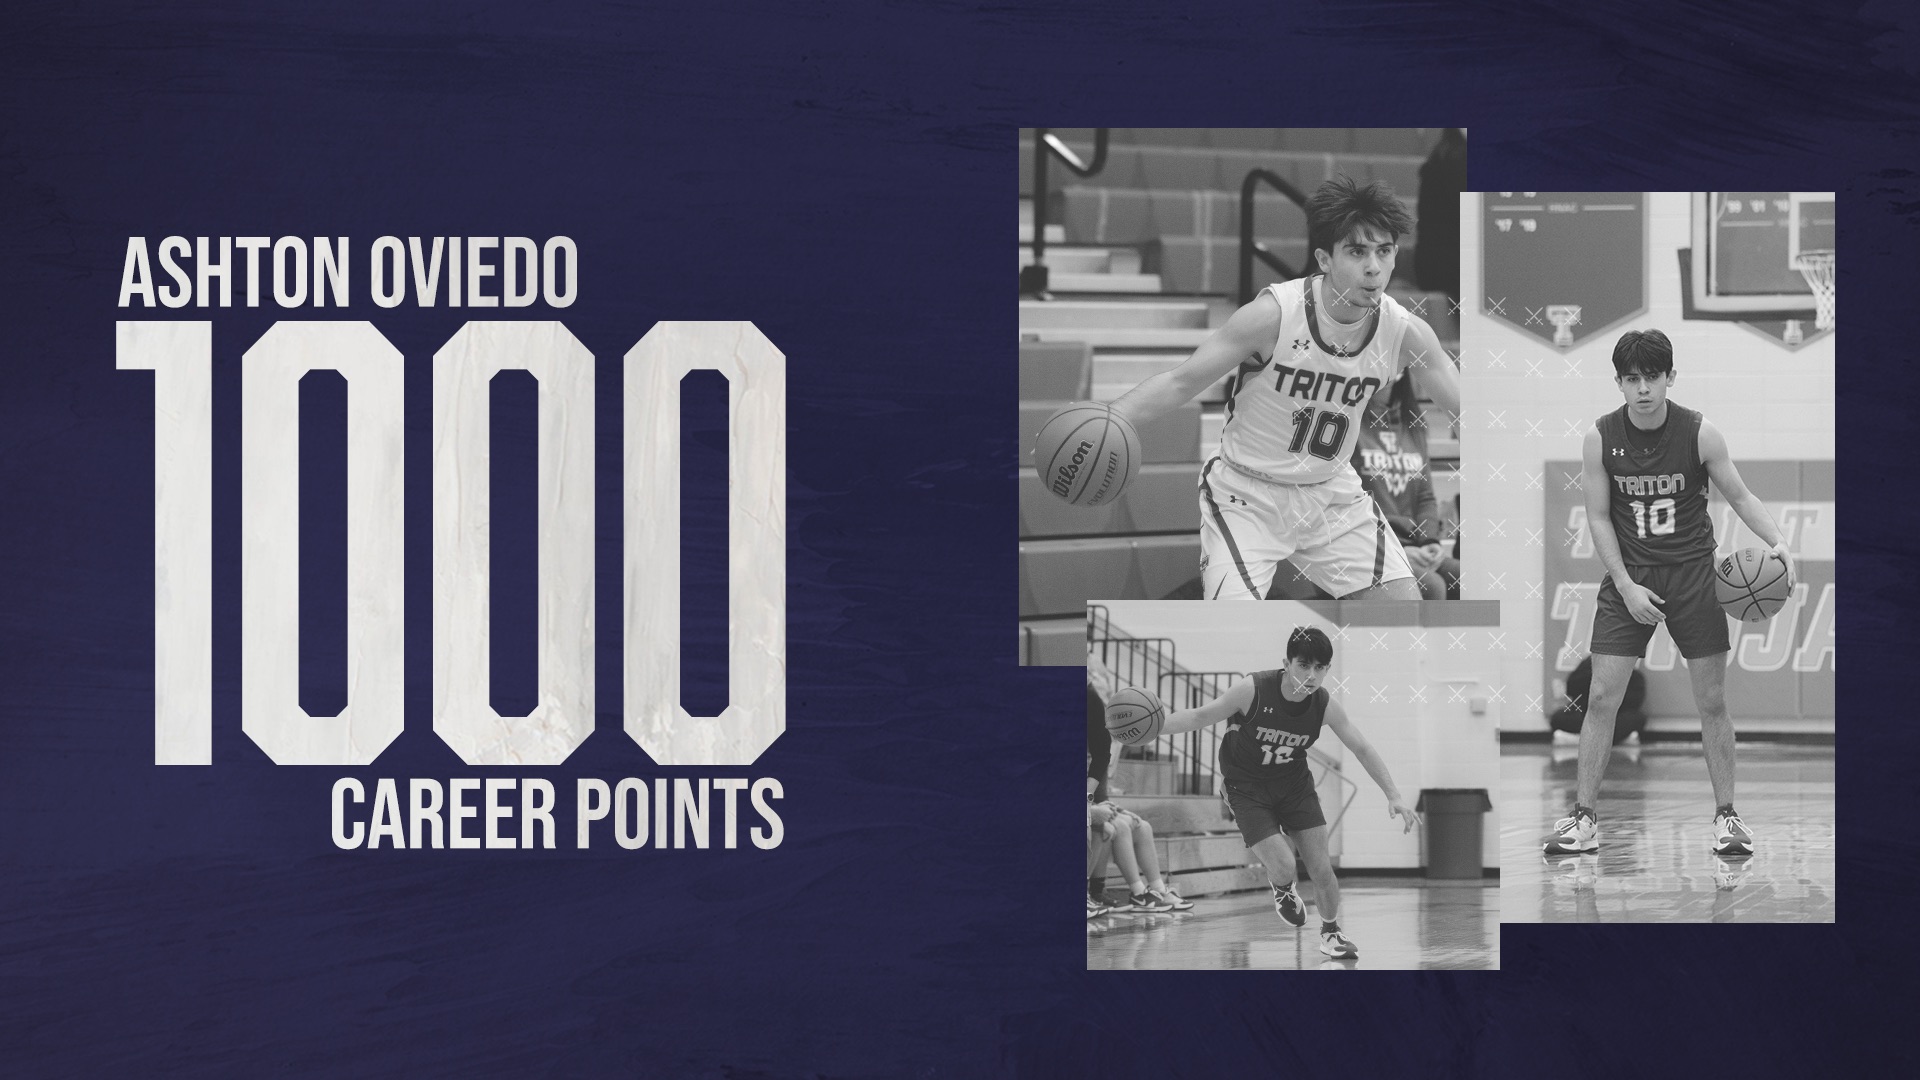 Oviedo Joins 1,000 Career Point Club